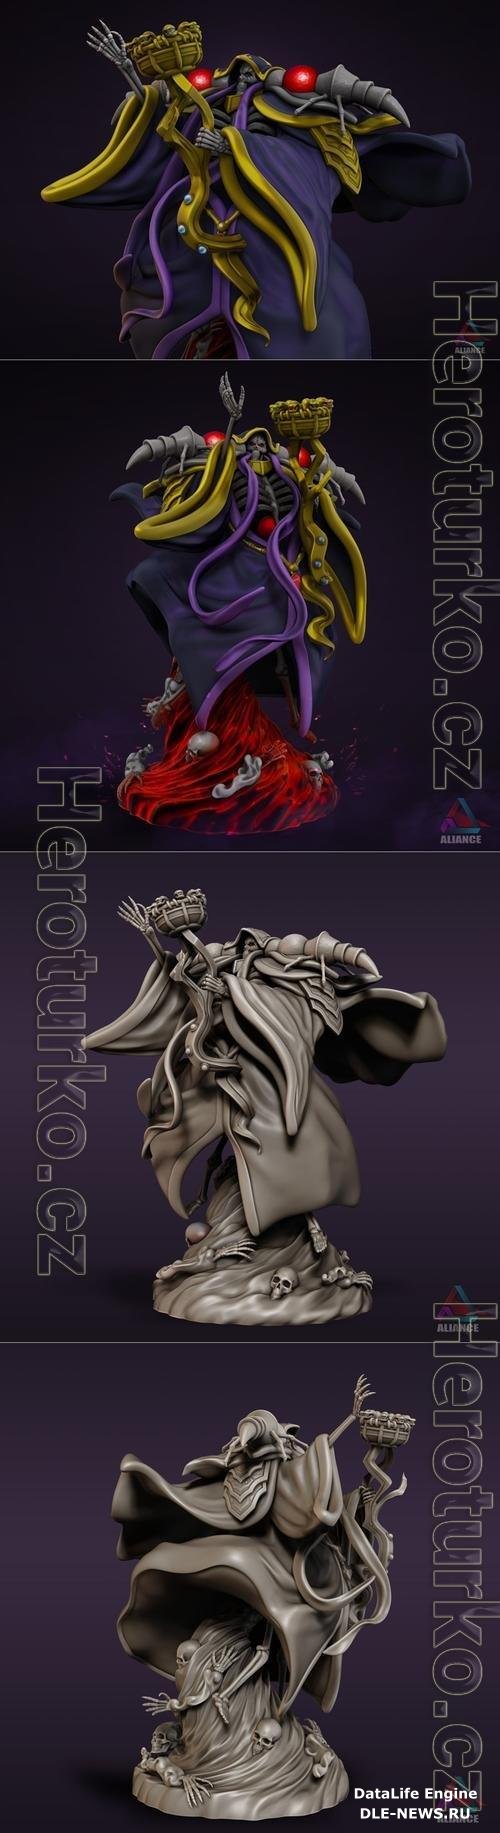 Ainz Ooal Gown - Overlord 3D Print